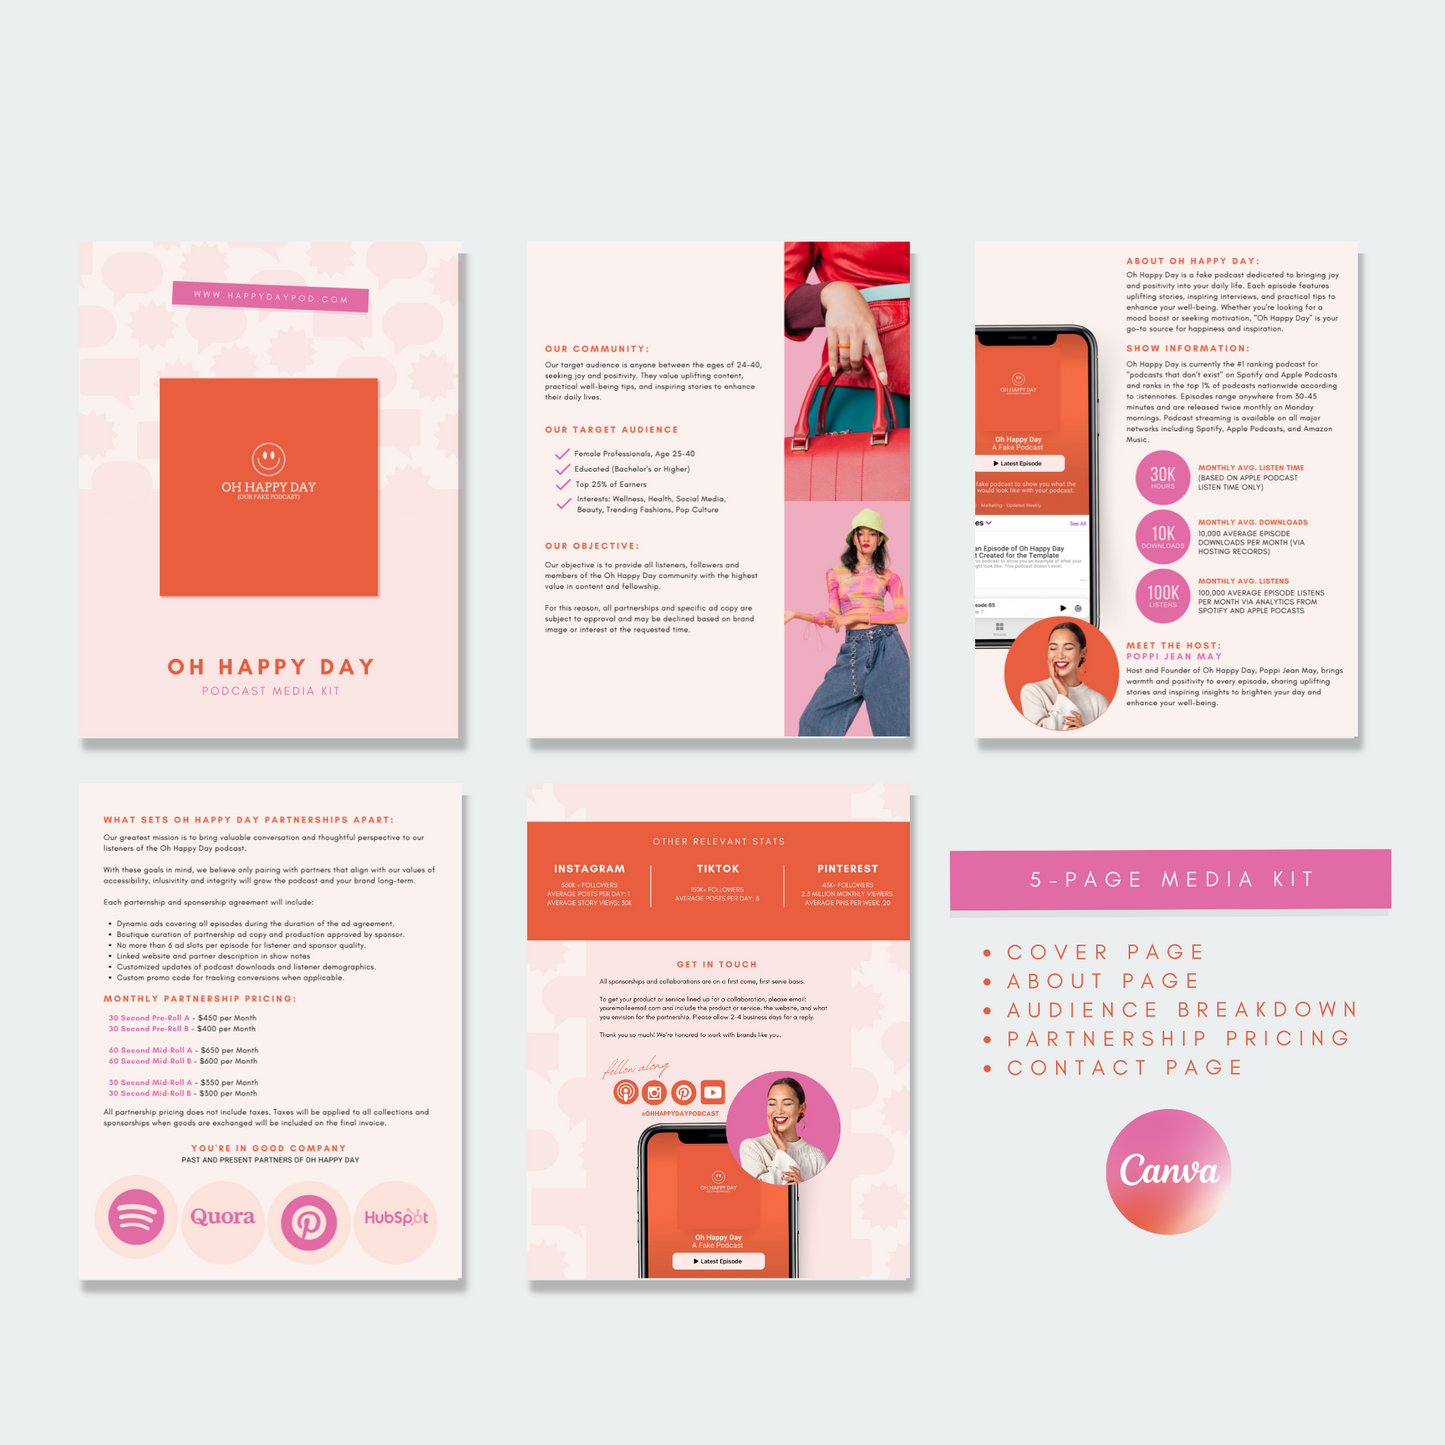 Podcast Media Kit and Rate Card